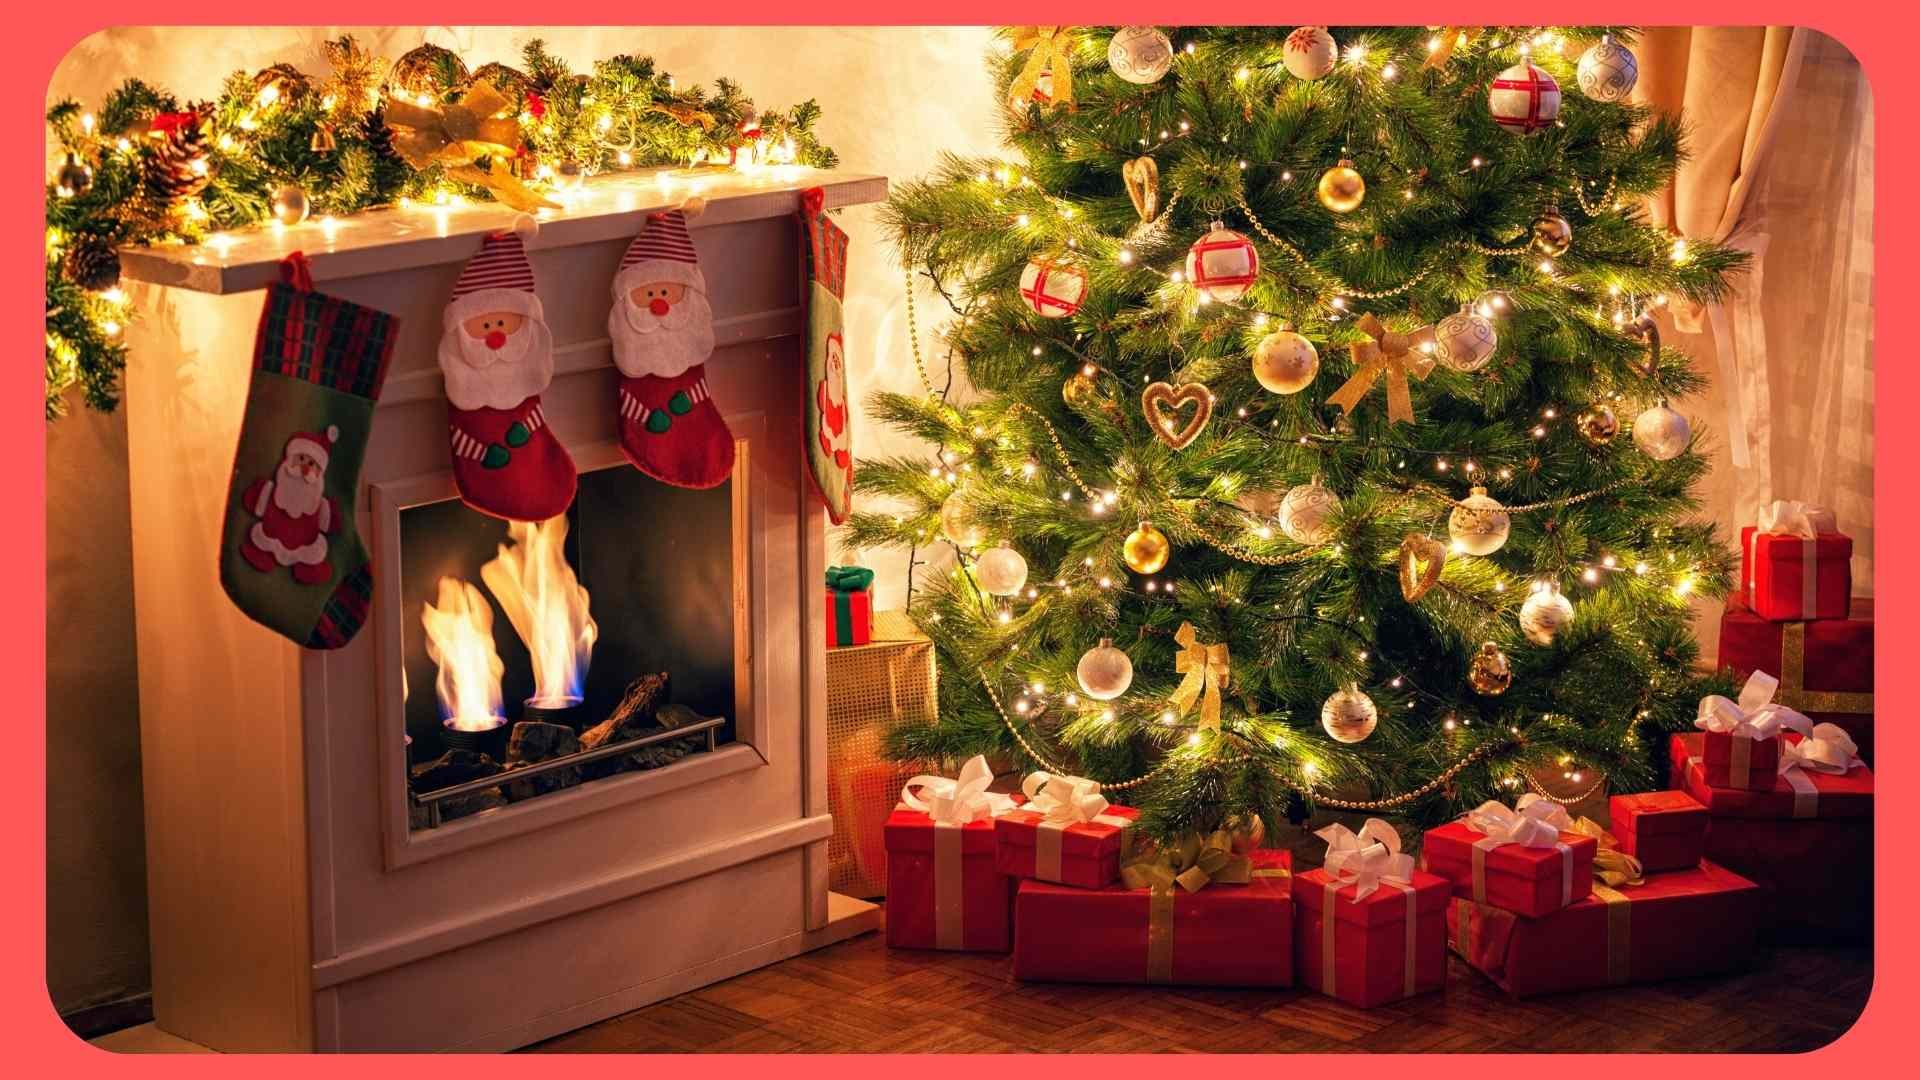 christmas tree with gifts and stocking by fire